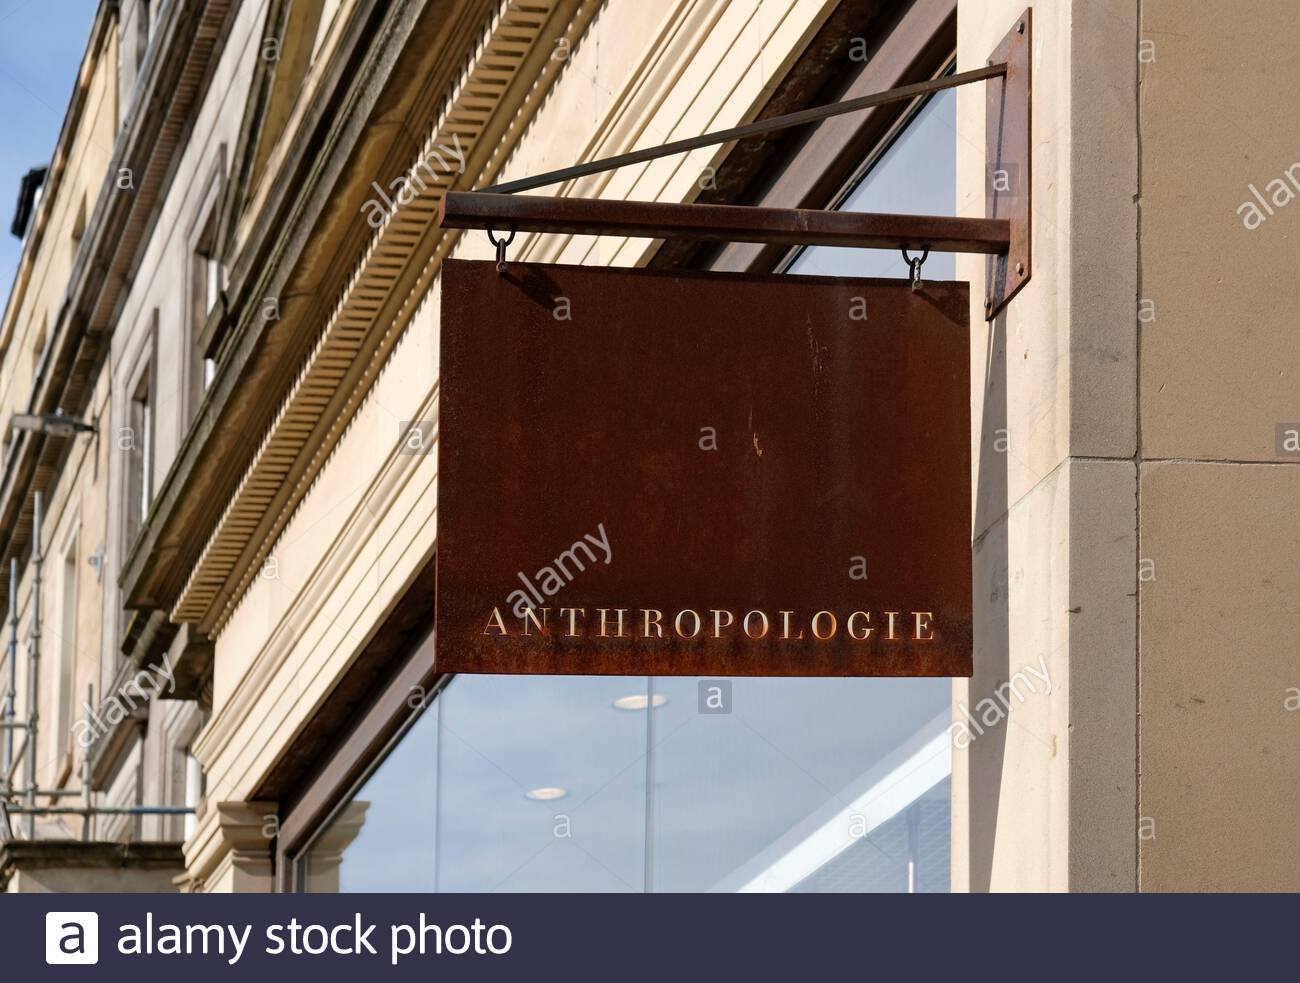 Anthropologie shop sign, retailer selling womenswear, shoes and accessories, George Street, Edinburgh Scotland Stock Photo